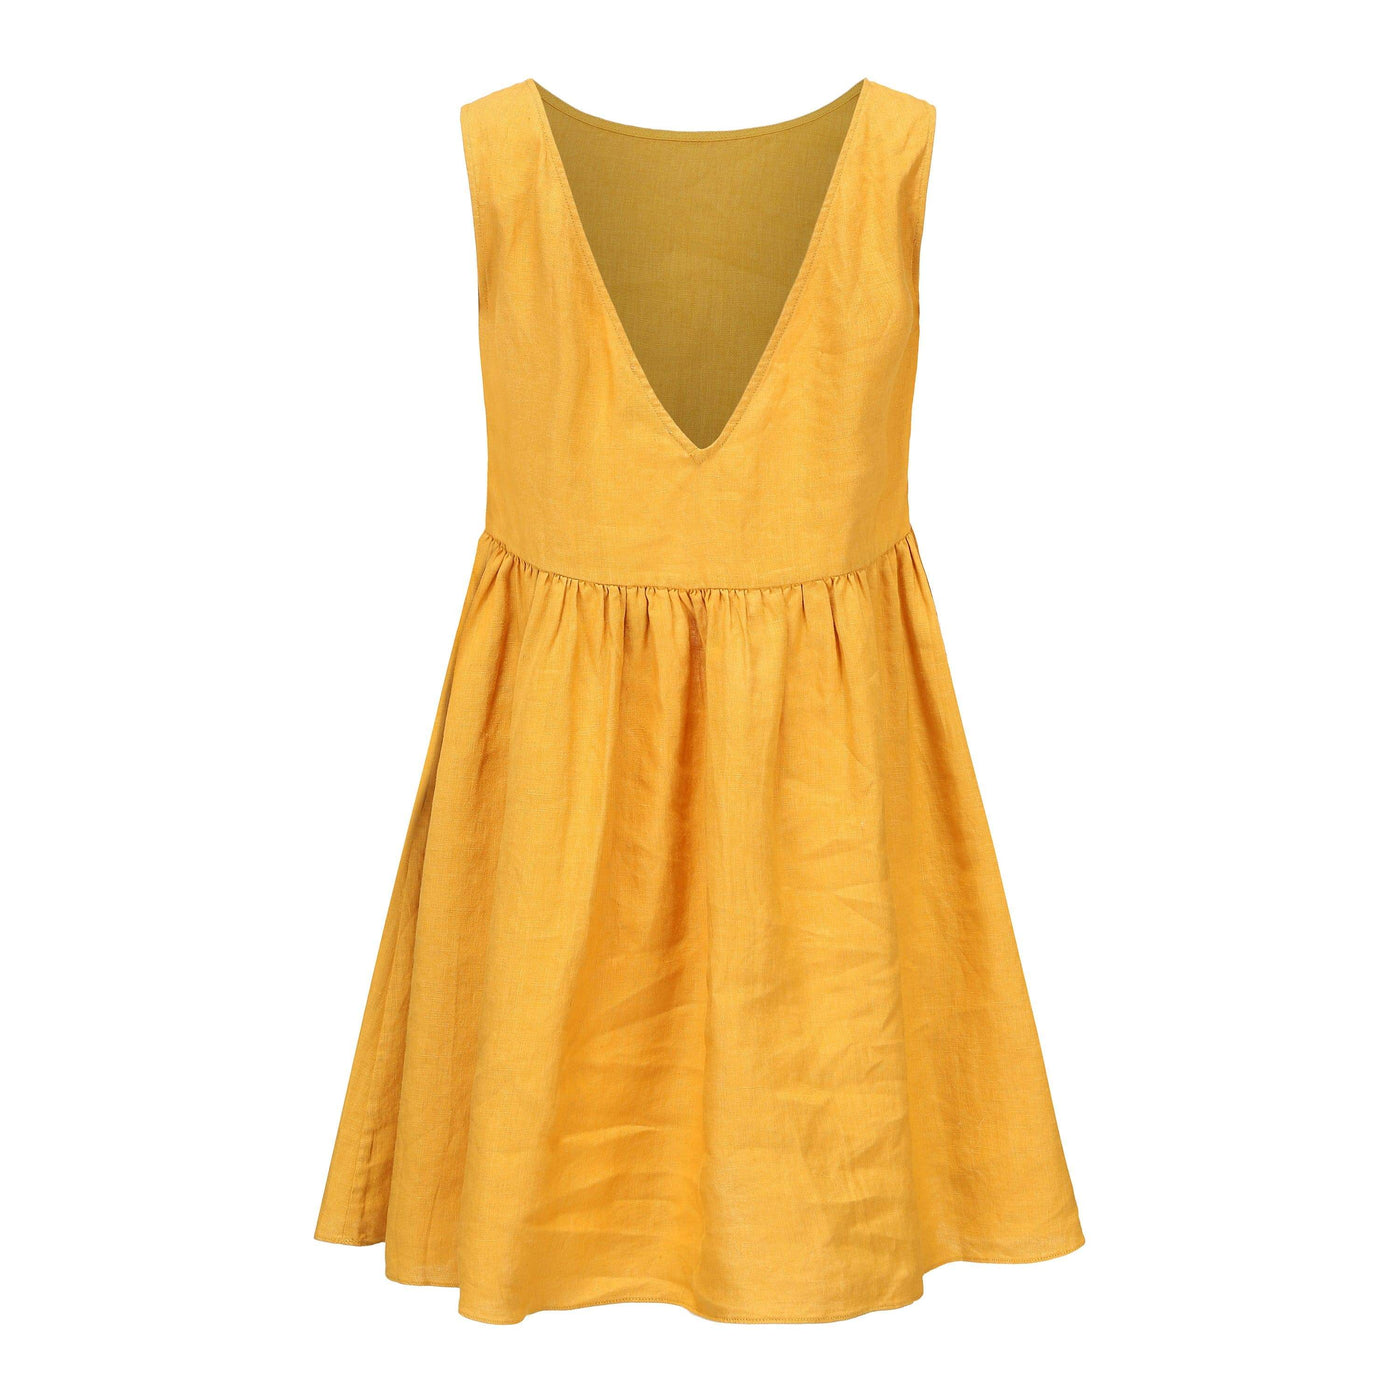 Lilly Pilly Collection 100% organic linen Harper Dress in Sunflower as 3D image showing back view